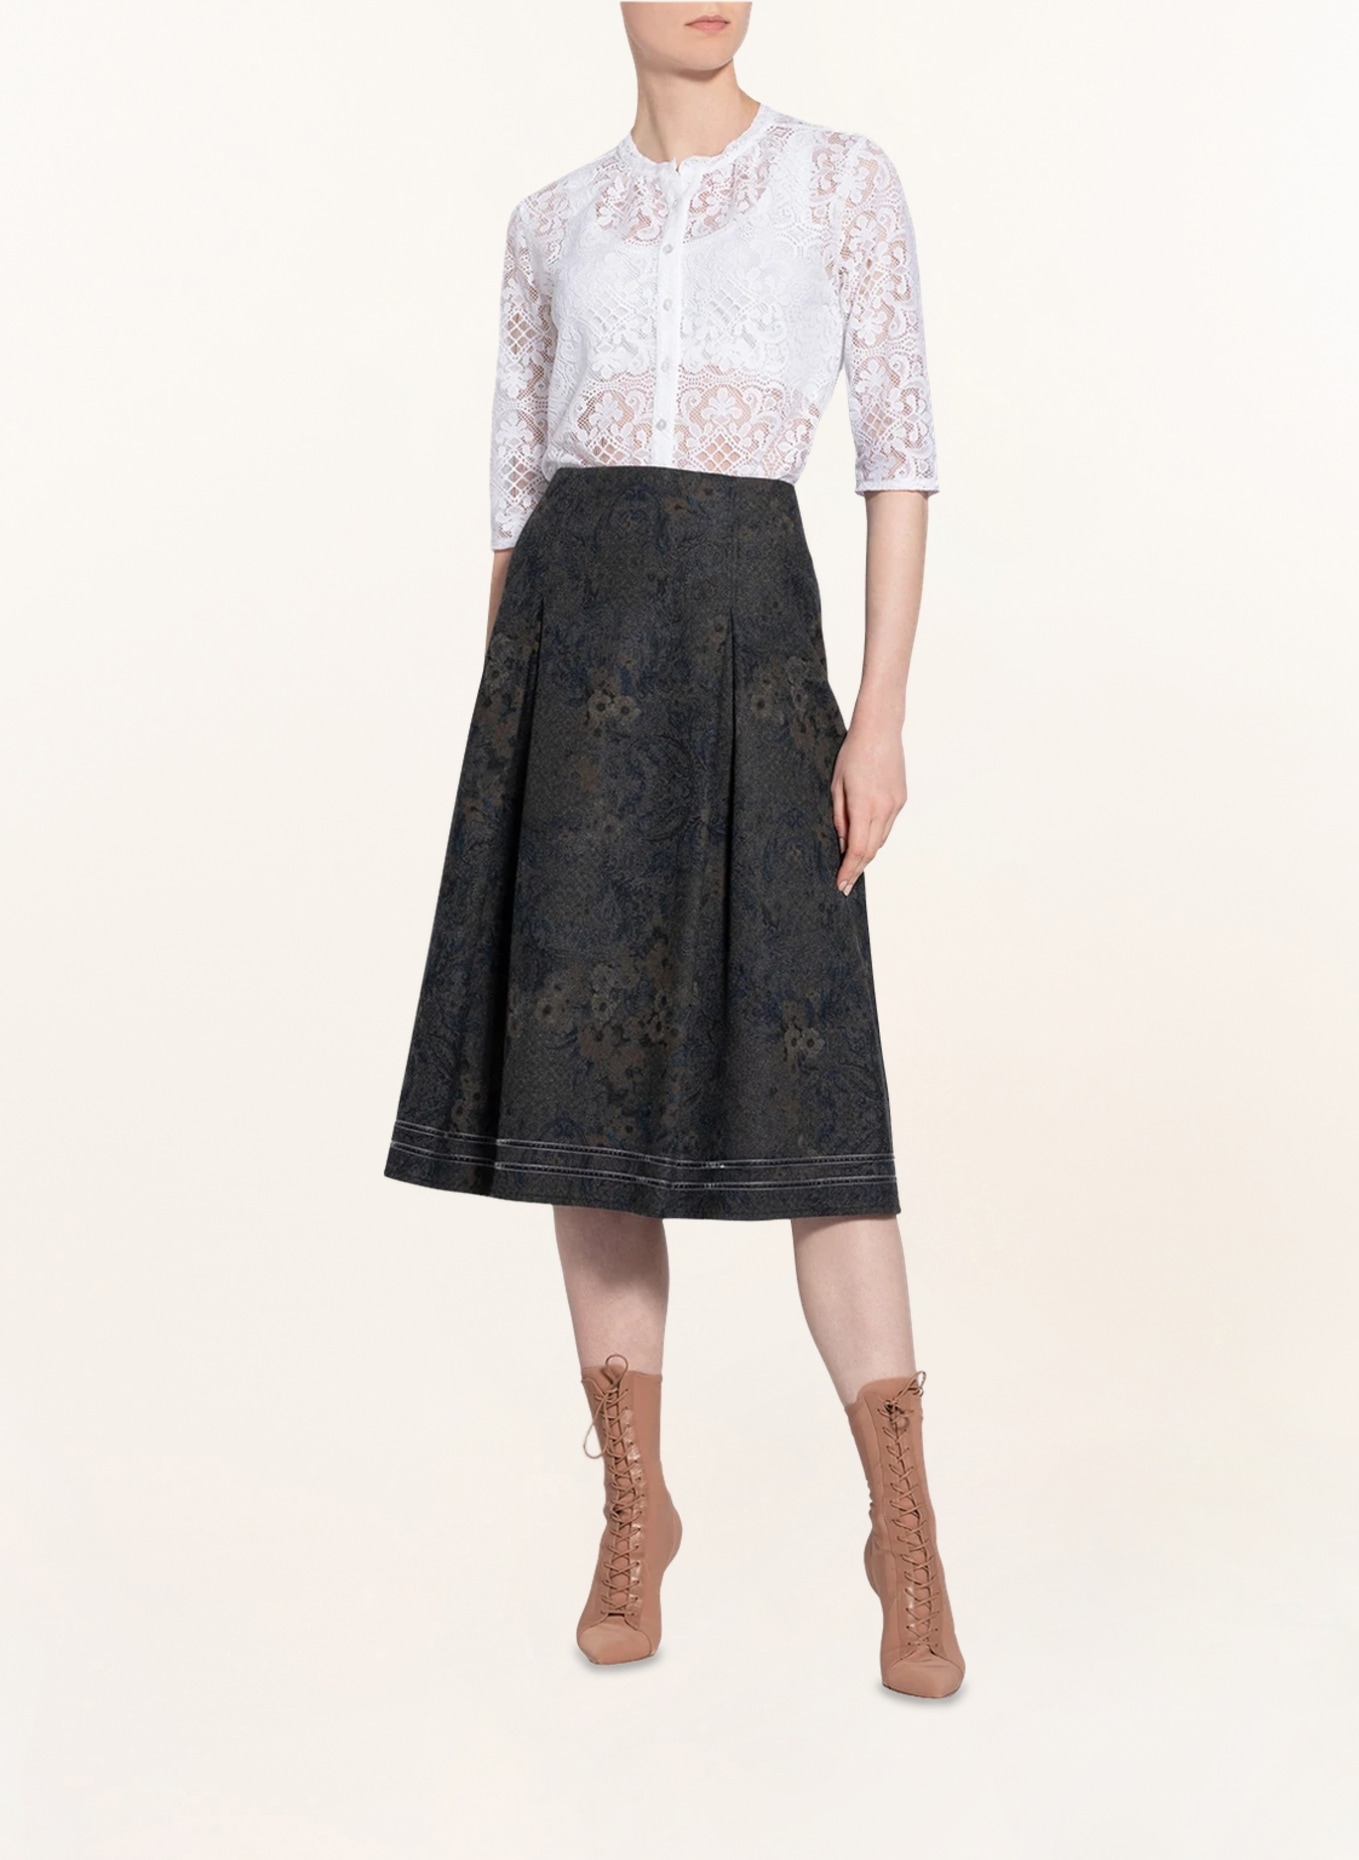 BERWIN & WOLFF Trachten blouse with 3/4 sleeves in lace, Color: WHITE (Image 4)